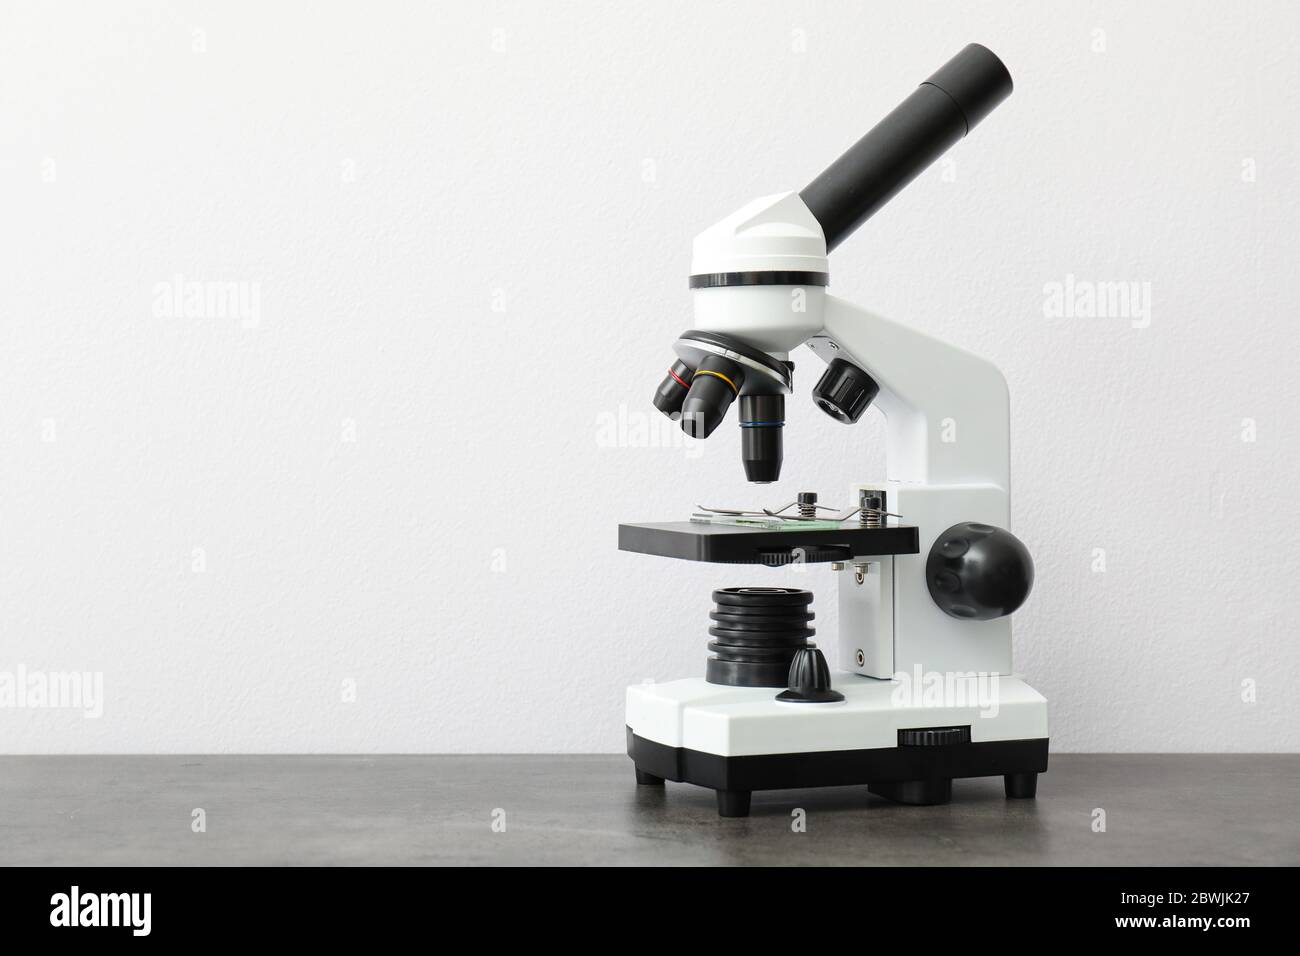 Modern microscope on table against light background Stock Photo - Alamy